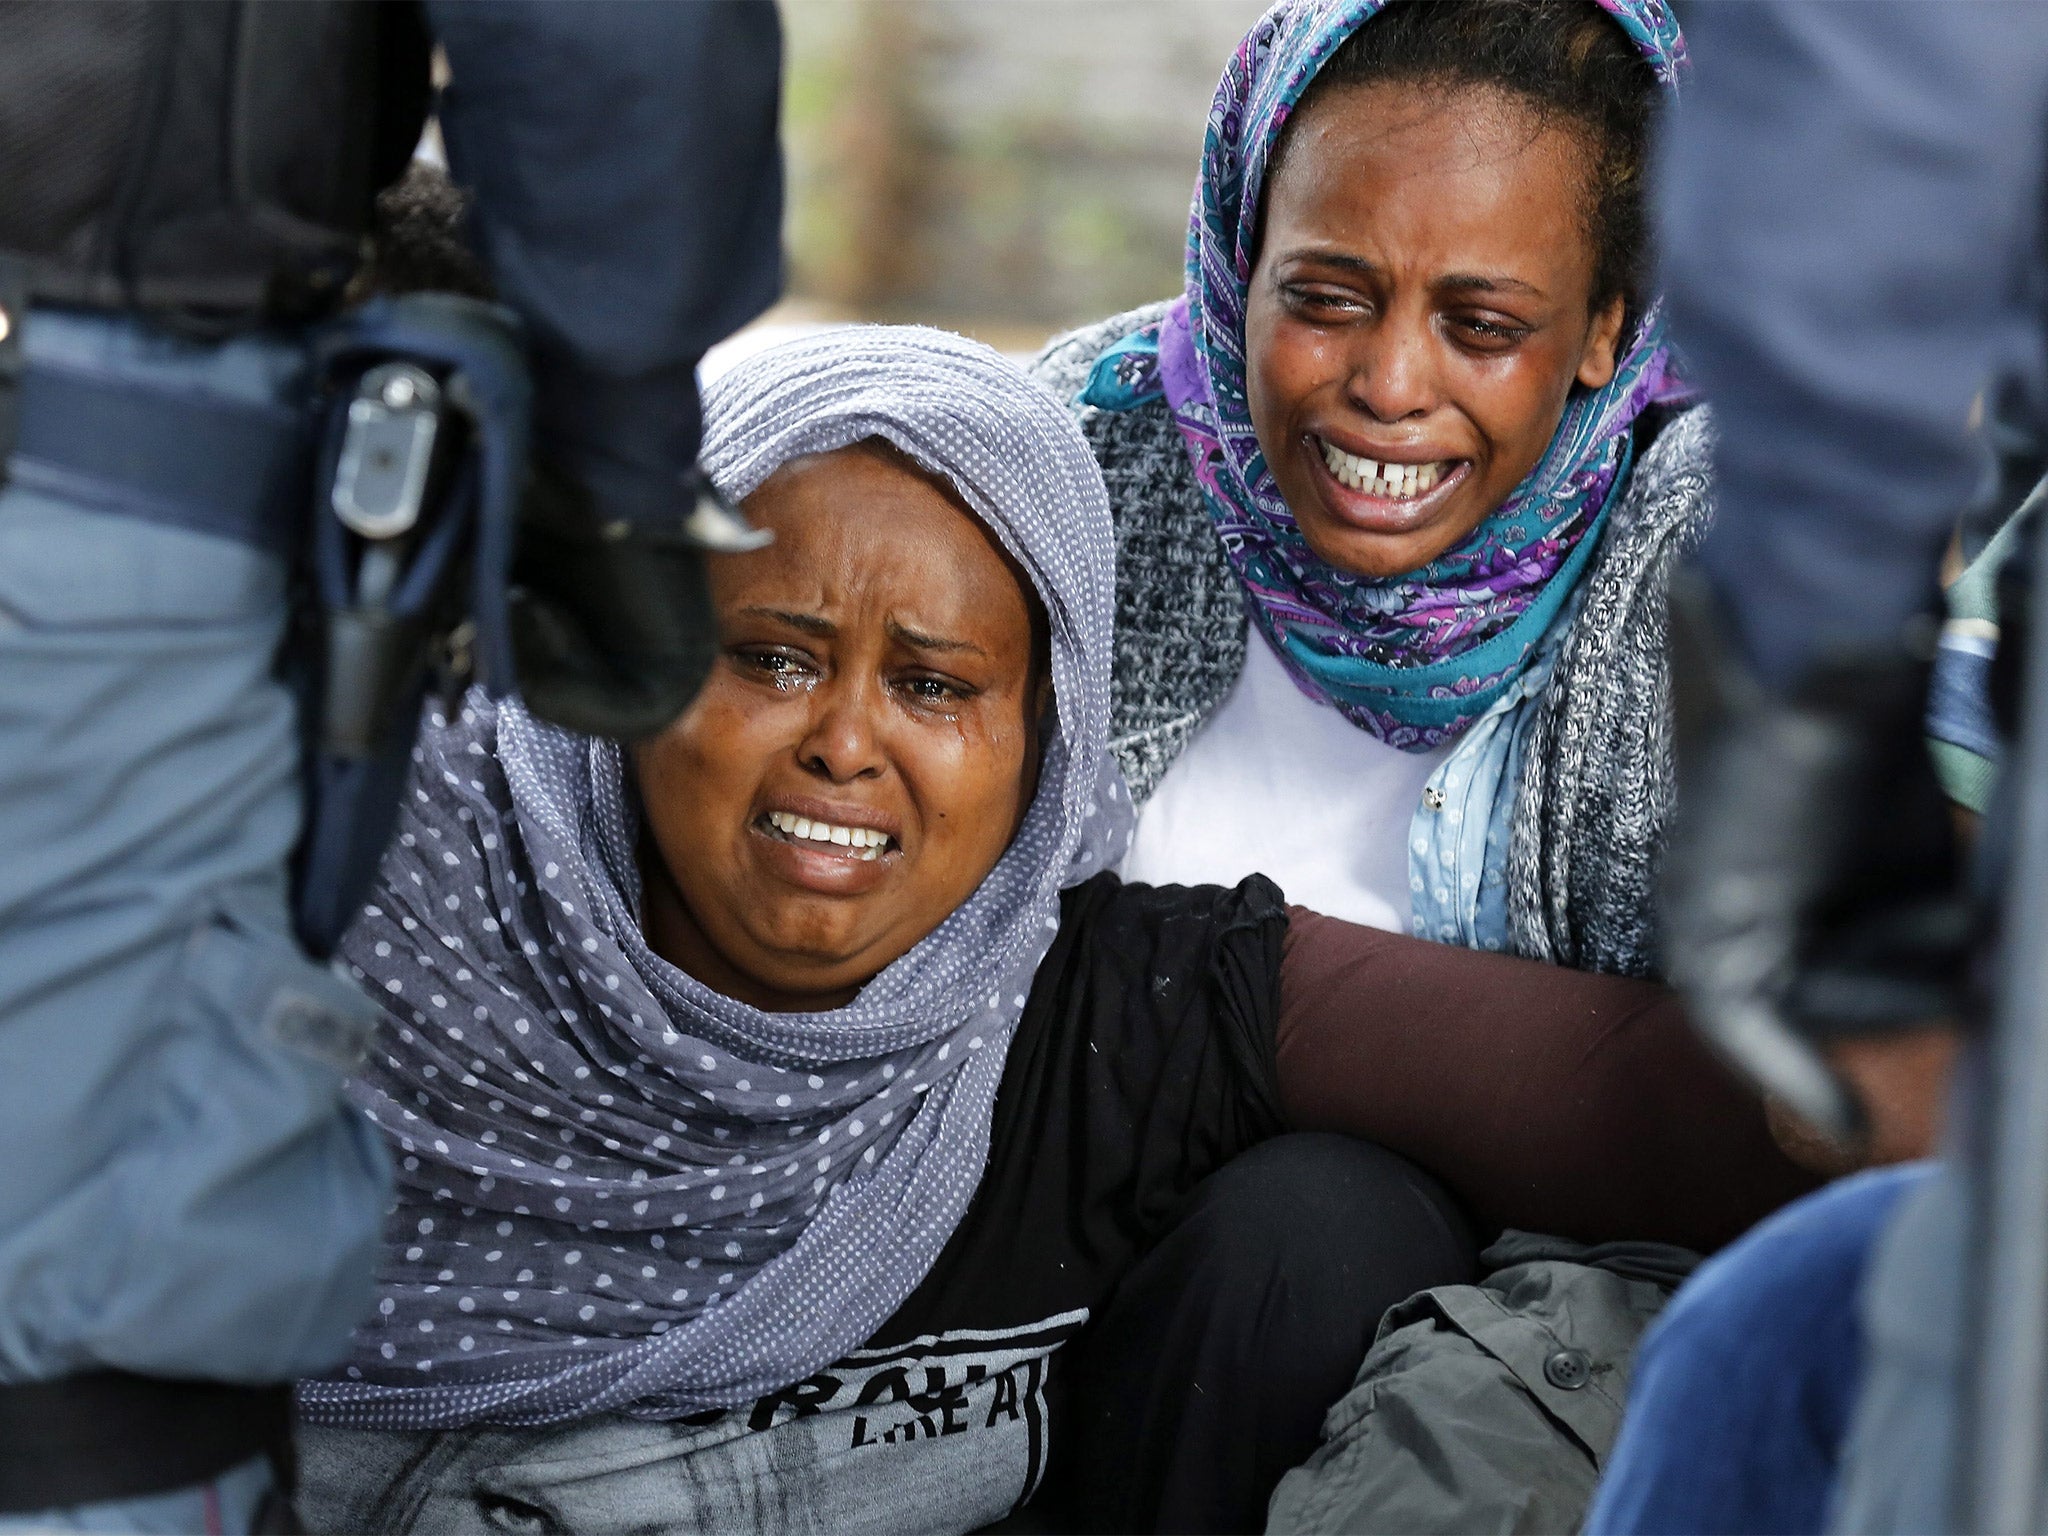 African migrants cry as Italian police stop them from crossing the border into France in Ventimiglia, Italy